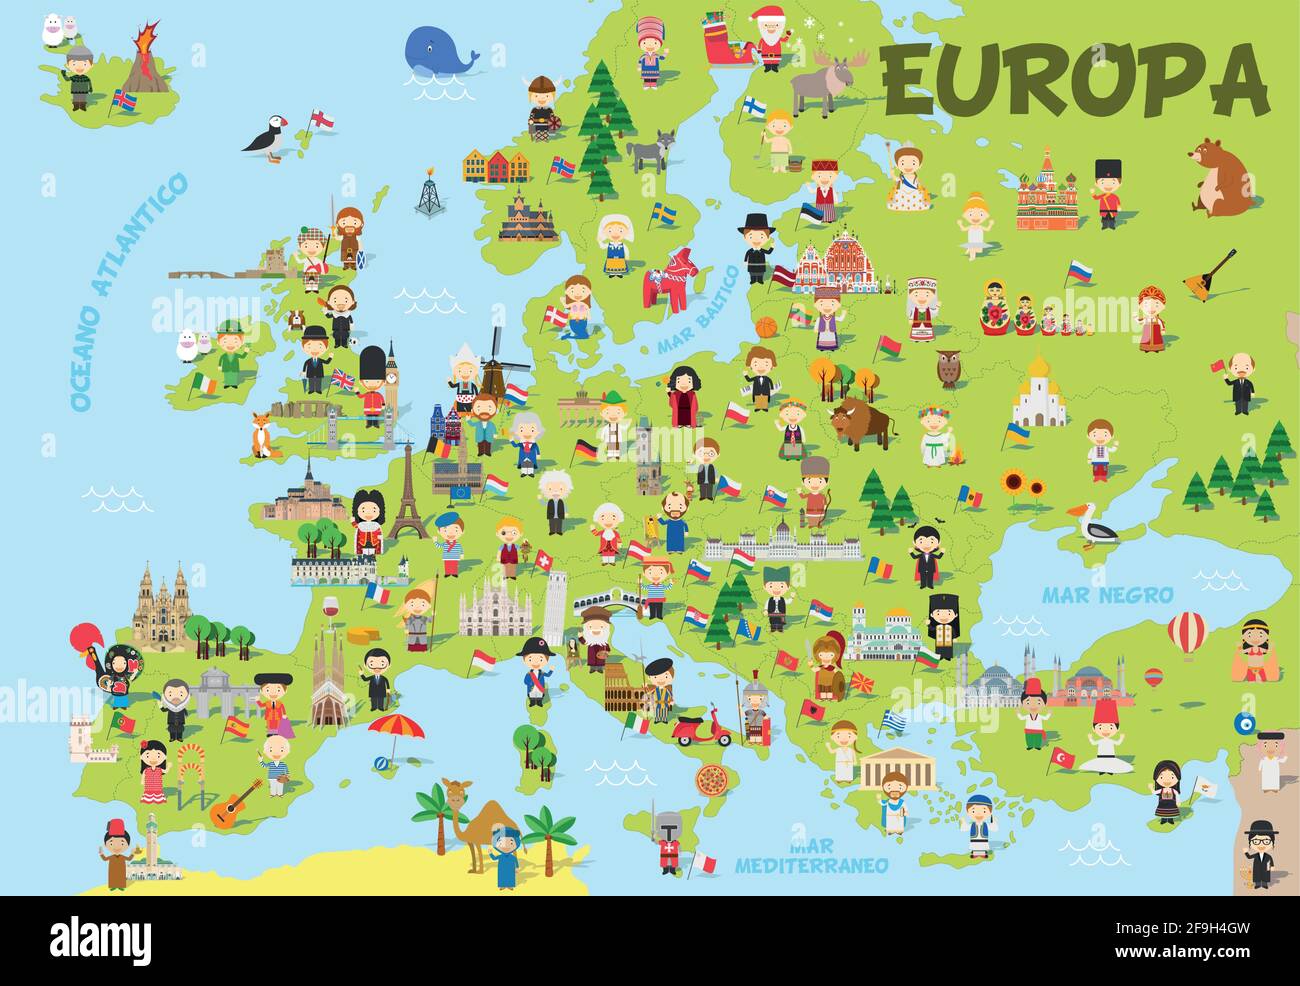 Funny cartoon map of Europe in spanish with childrens of different nationalities, representative monuments, animals and objects of all the countries. Stock Vector